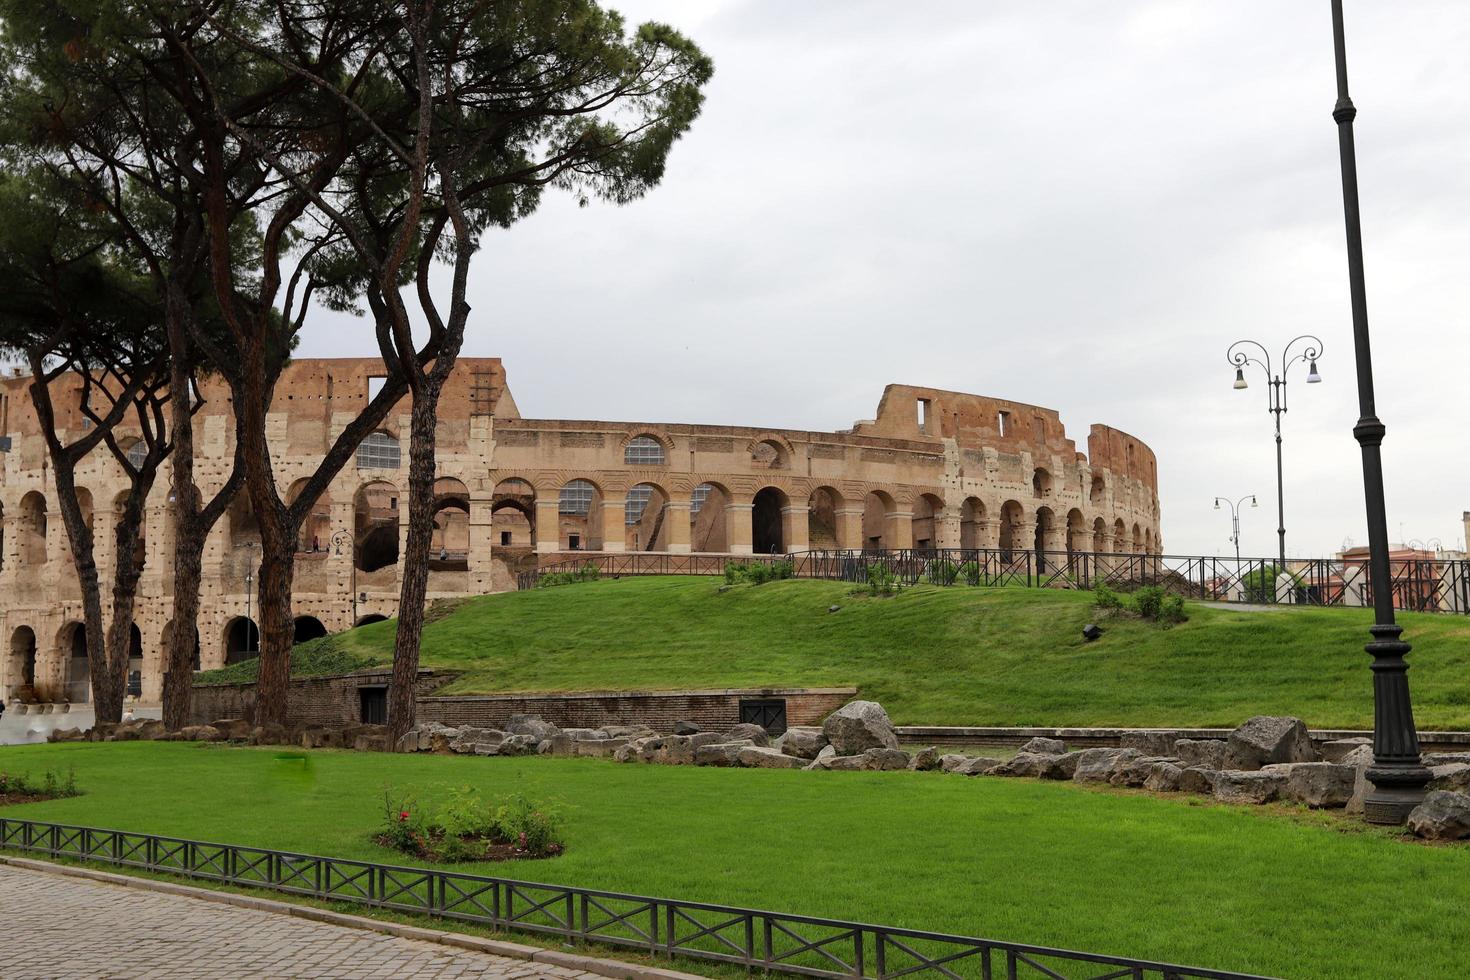 Colosseum Italy May 6, 2022 The Colosseum is an architectural monument of Ancient Rome. photo